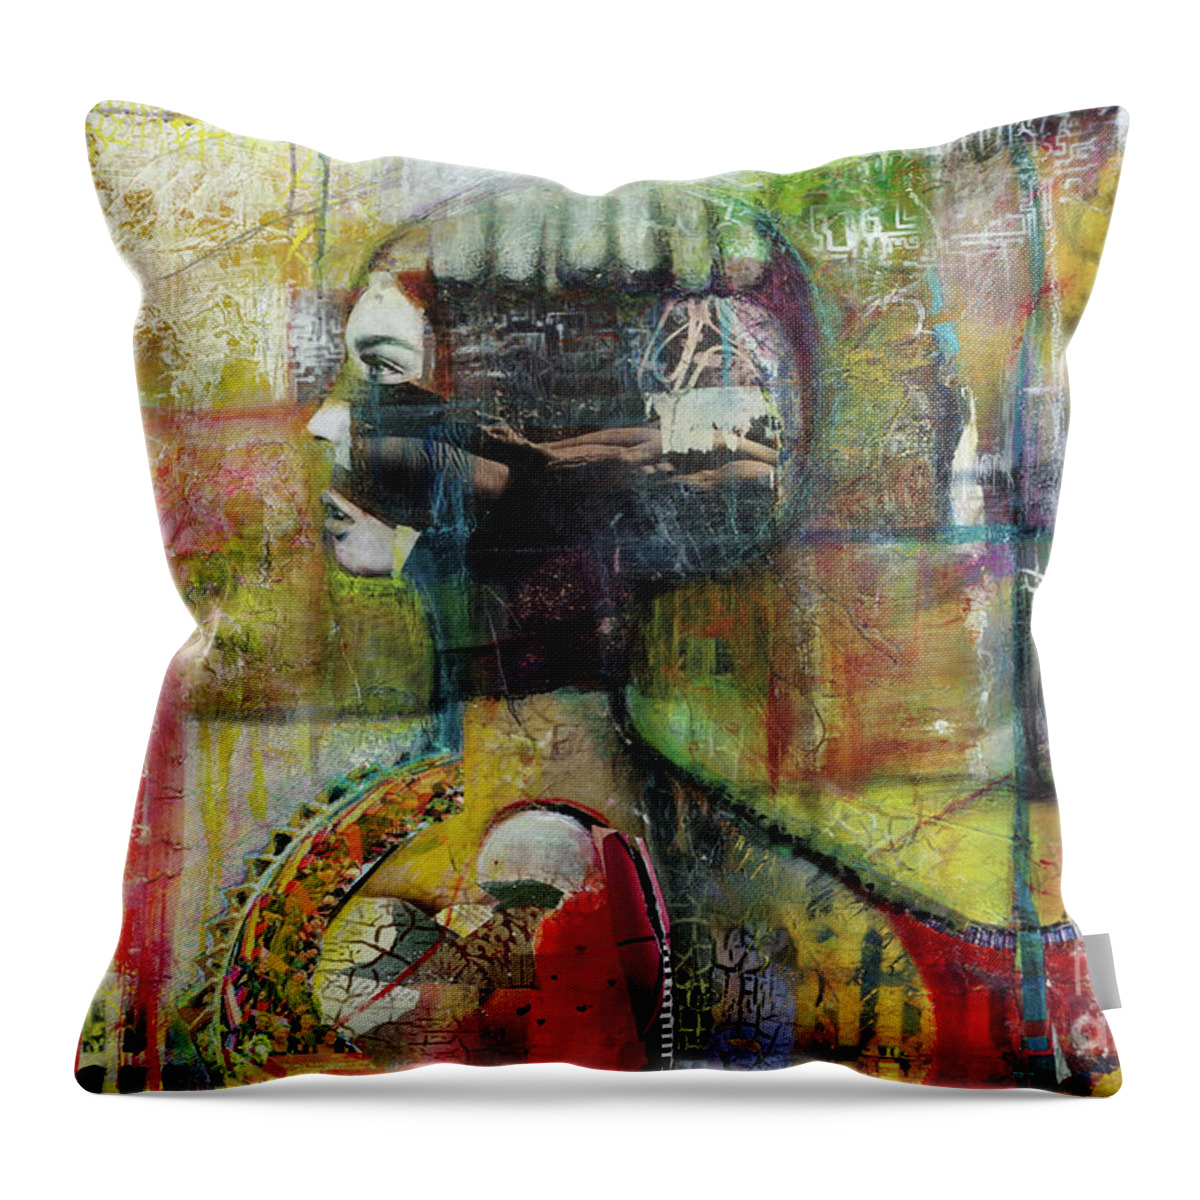  Throw Pillow featuring the mixed media Subject Matters by Val Zee McCune